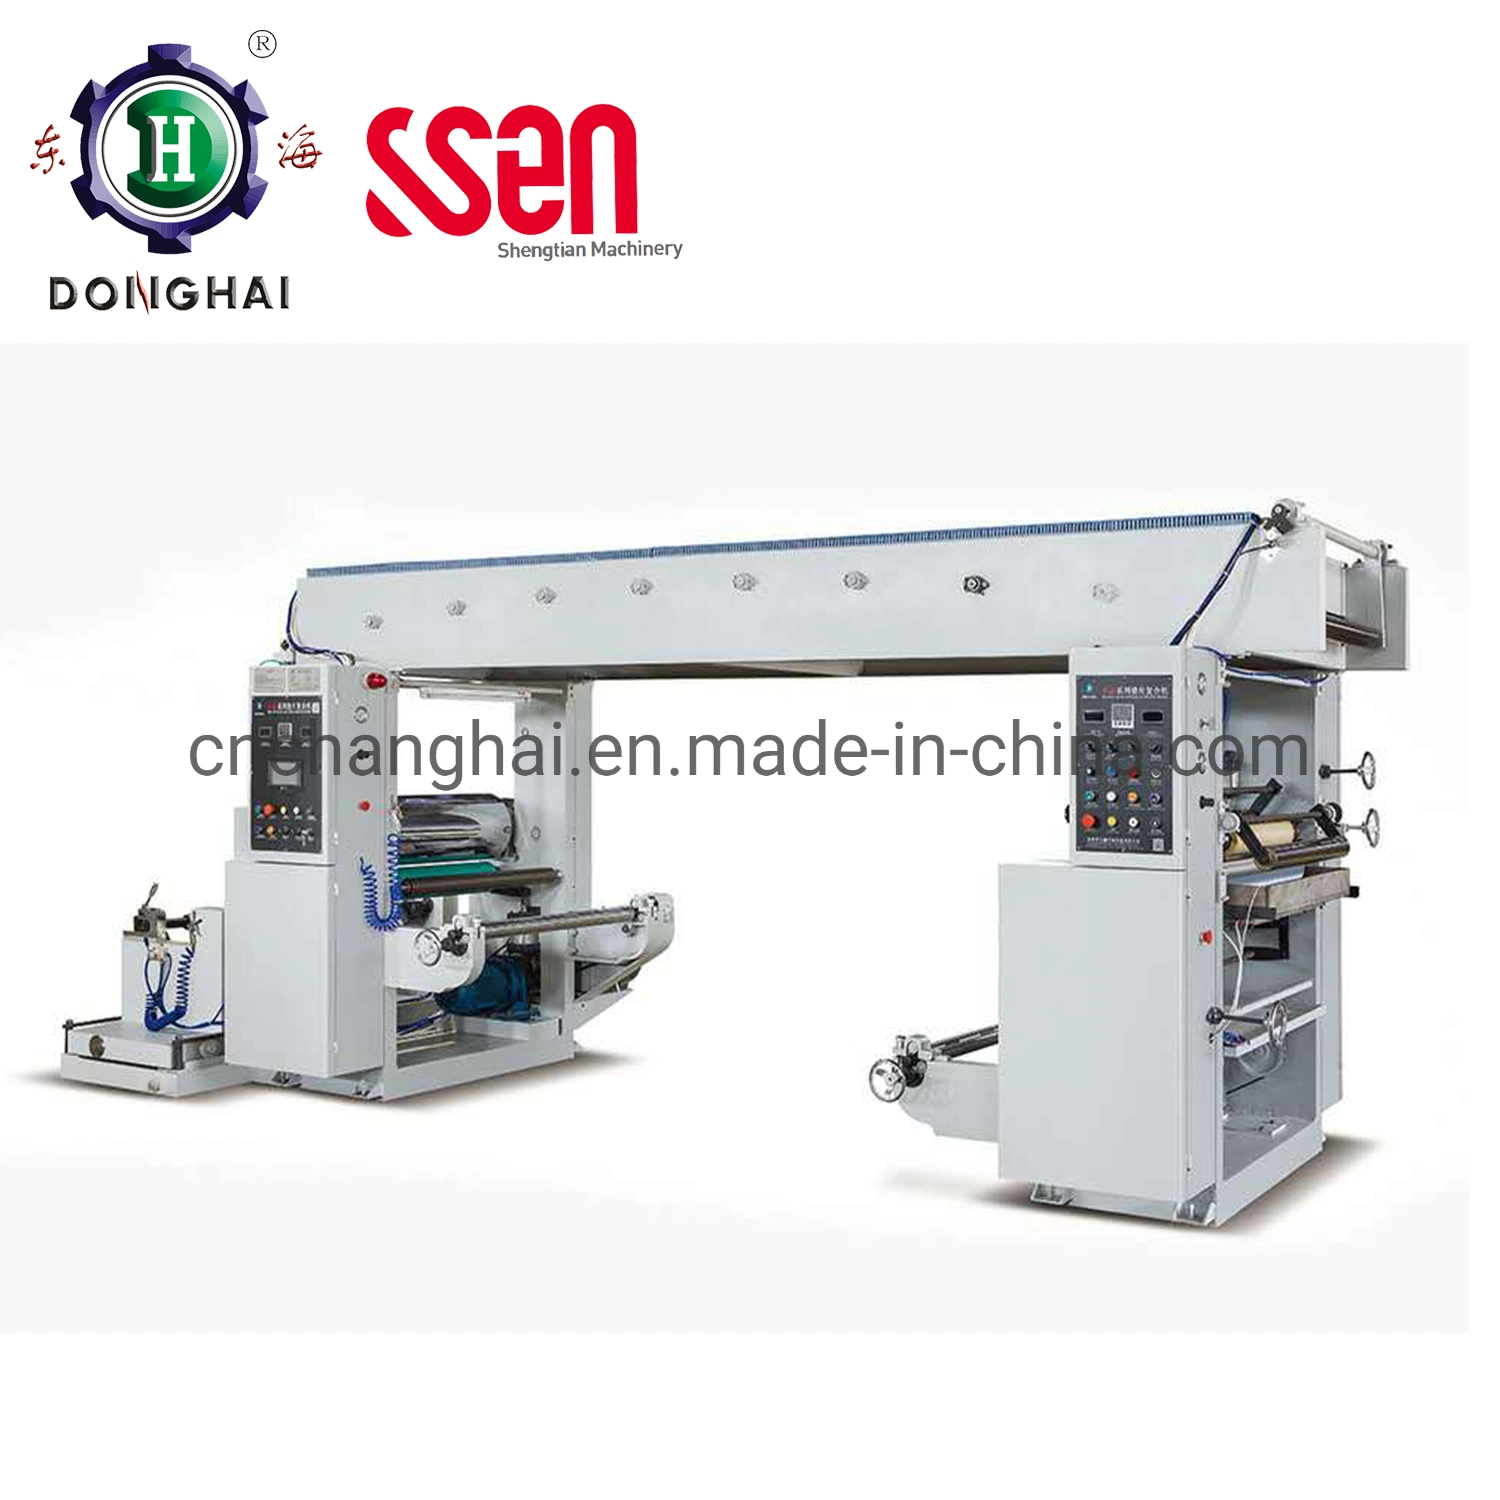 Donghai Brand Wax Laminating Coating Machine Special for Induction Cap Seal Liners